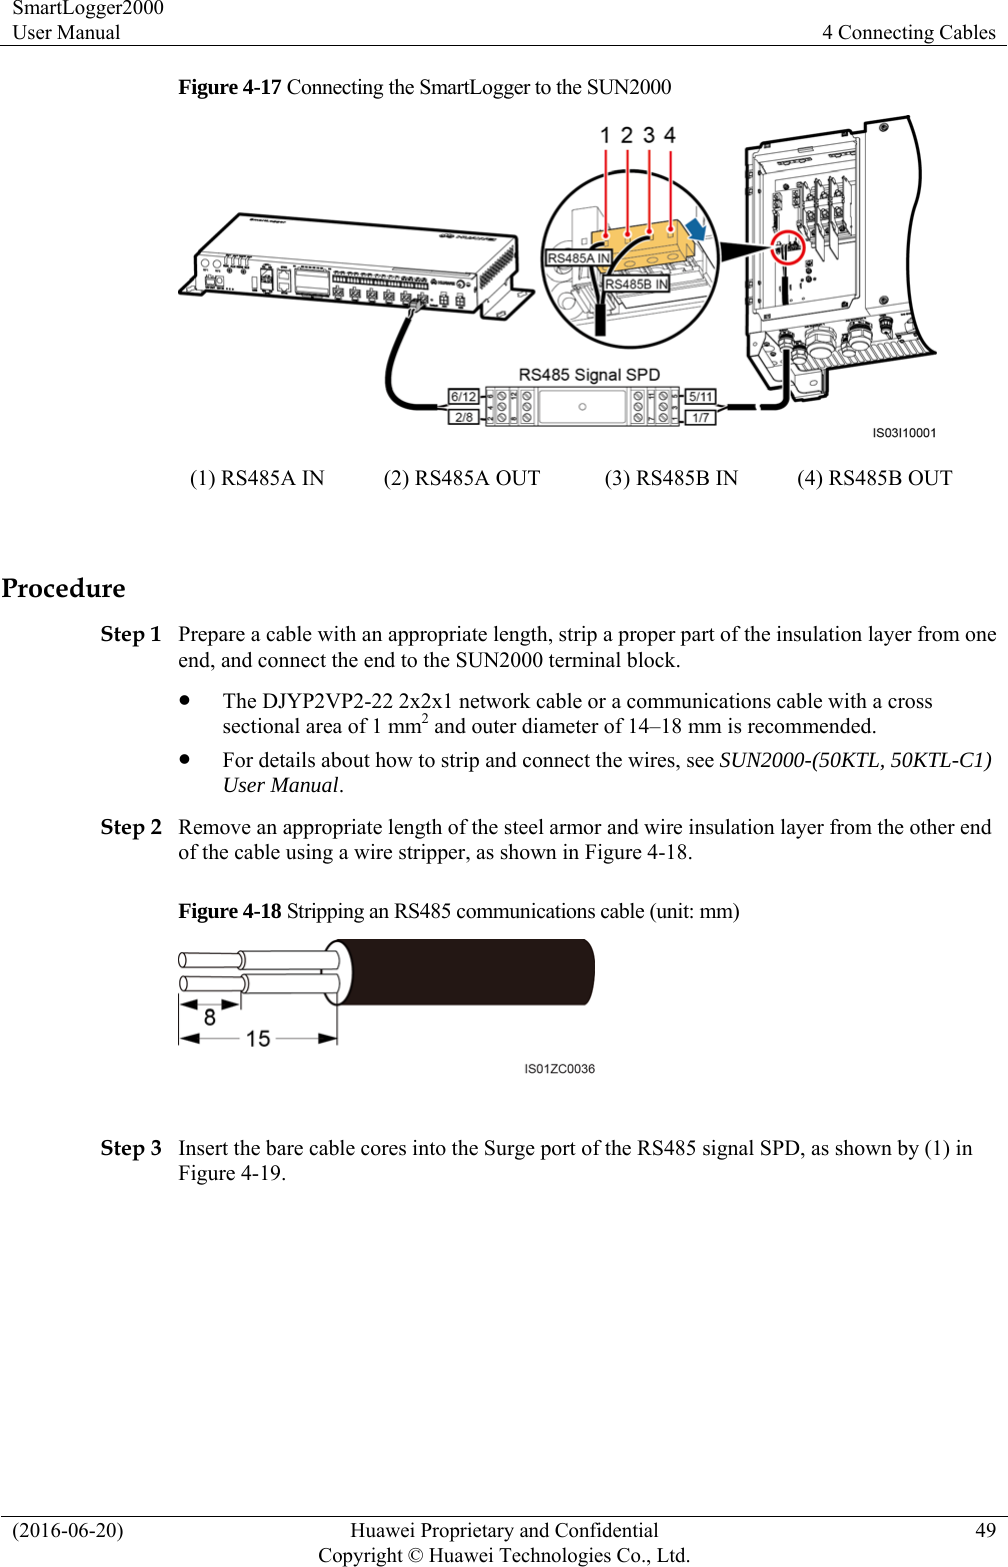 SmartLogger2000 User Manual  4 Connecting Cables (2016-06-20)  Huawei Proprietary and Confidential         Copyright © Huawei Technologies Co., Ltd.49 Figure 4-17 Connecting the SmartLogger to the SUN2000  (1) RS485A IN  (2) RS485A OUT  (3) RS485B IN    (4) RS485B OUT    Procedure Step 1 Prepare a cable with an appropriate length, strip a proper part of the insulation layer from one end, and connect the end to the SUN2000 terminal block.    The DJYP2VP2-22 2x2x1 network cable or a communications cable with a cross sectional area of 1 mm2 and outer diameter of 14–18 mm is recommended.    For details about how to strip and connect the wires, see SUN2000-(50KTL, 50KTL-C1) User Manual.  Step 2 Remove an appropriate length of the steel armor and wire insulation layer from the other end of the cable using a wire stripper, as shown in Figure 4-18. Figure 4-18 Stripping an RS485 communications cable (unit: mm)   Step 3 Insert the bare cable cores into the Surge port of the RS485 signal SPD, as shown by (1) in Figure 4-19. 